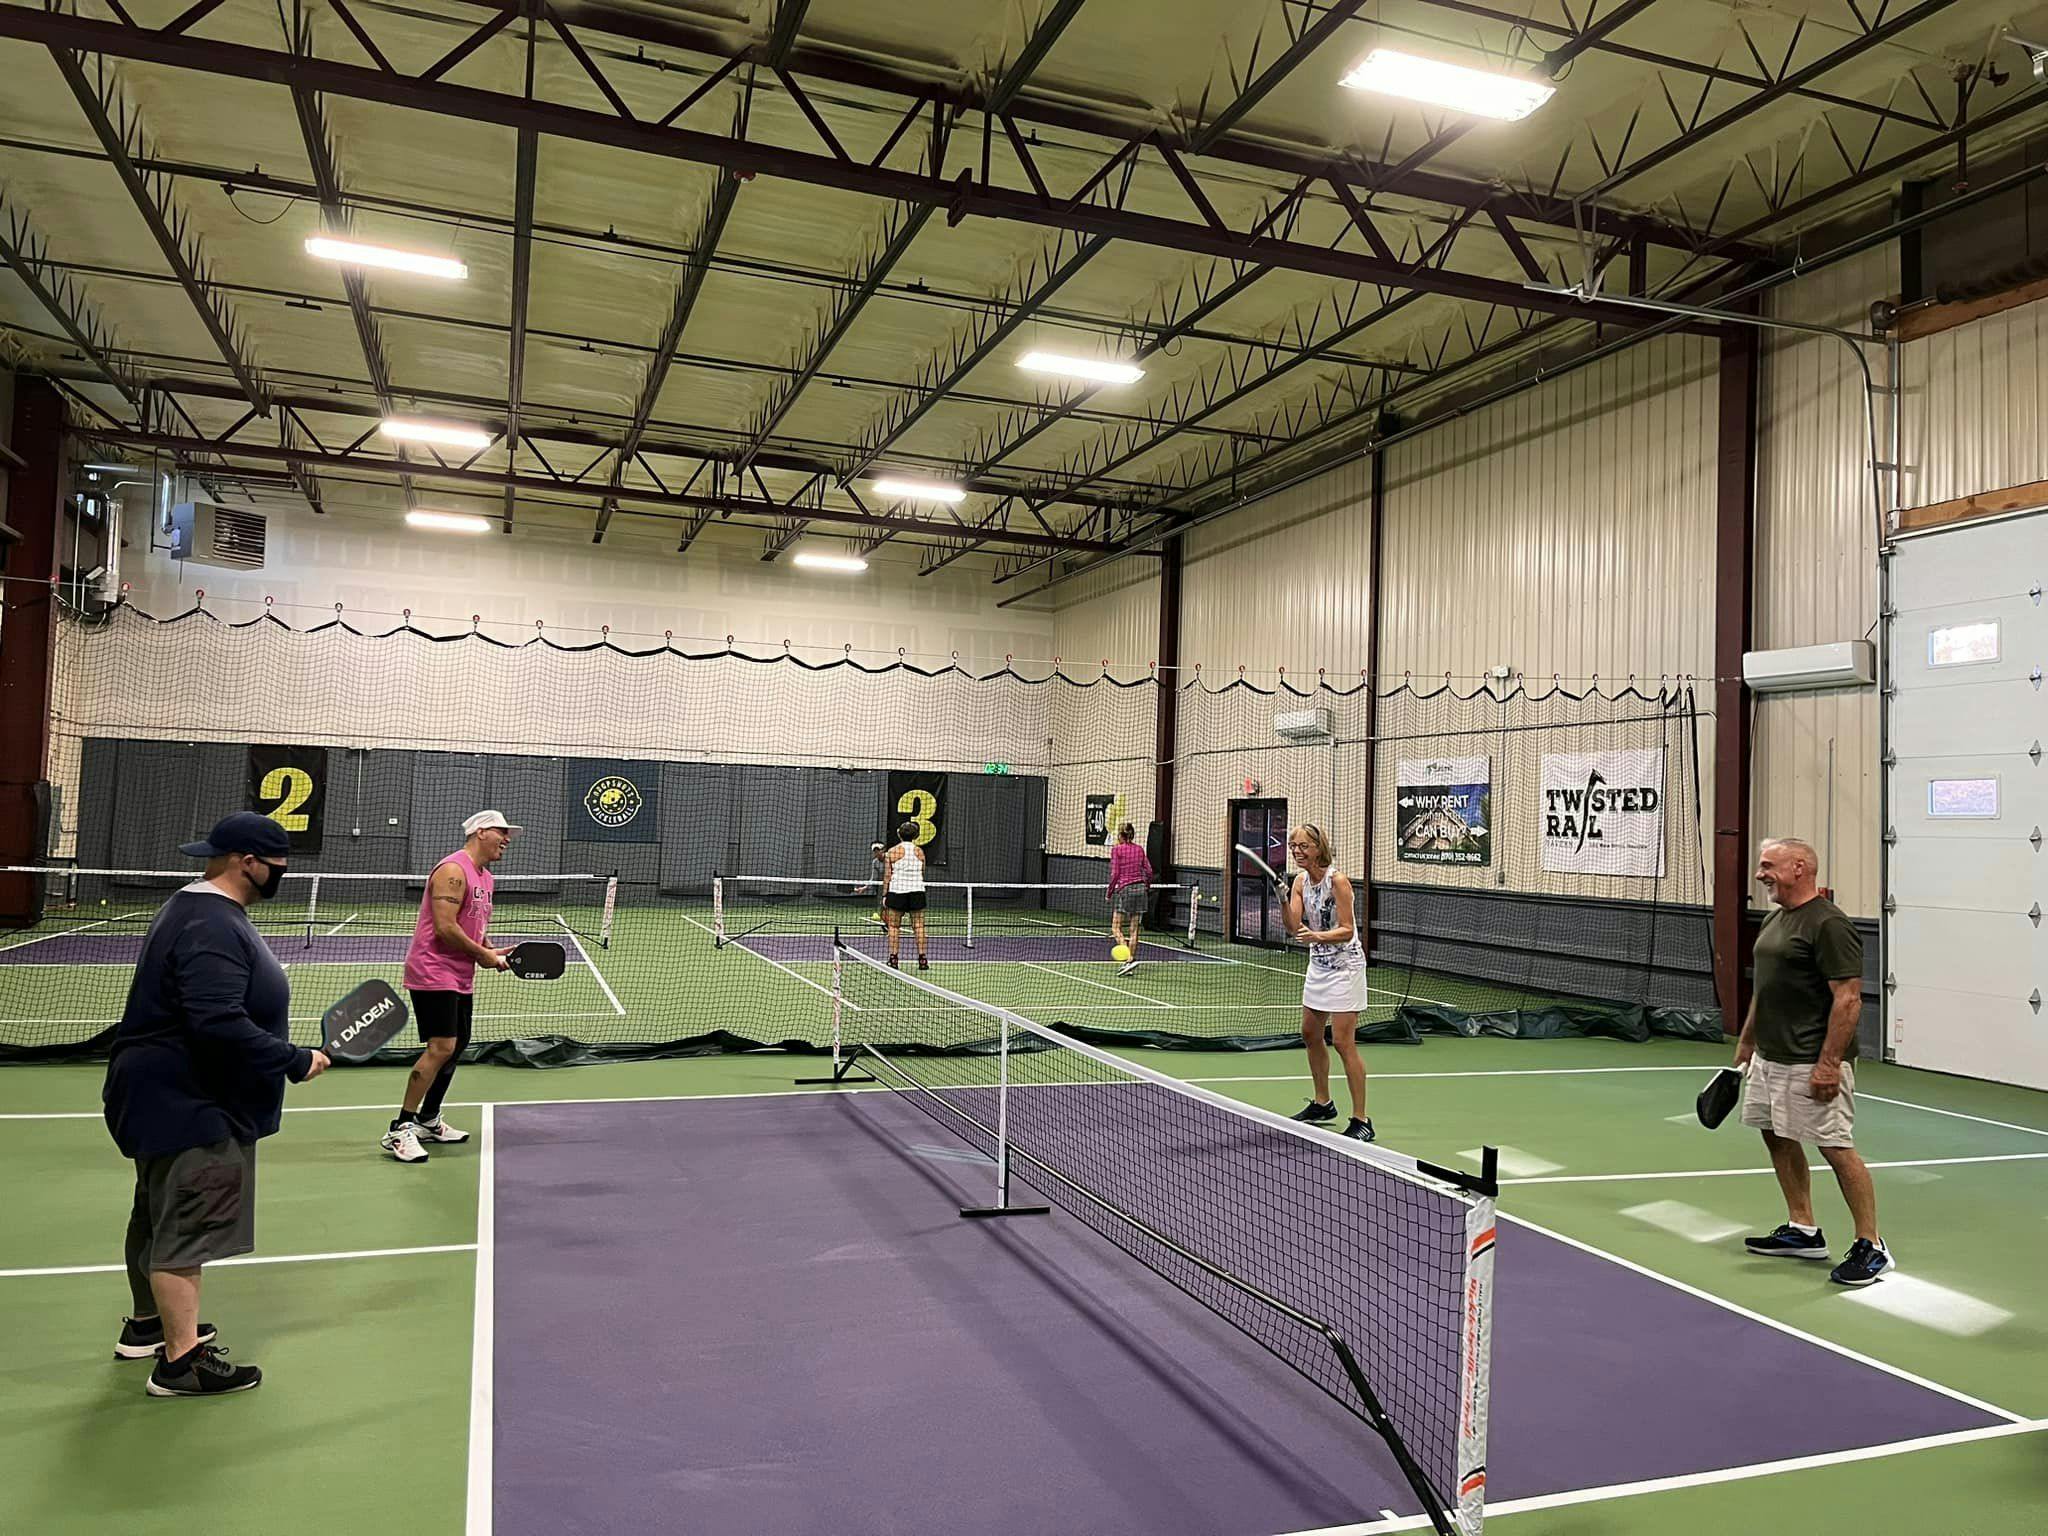 Image 1 of 2 of Dropshots Pickleball court